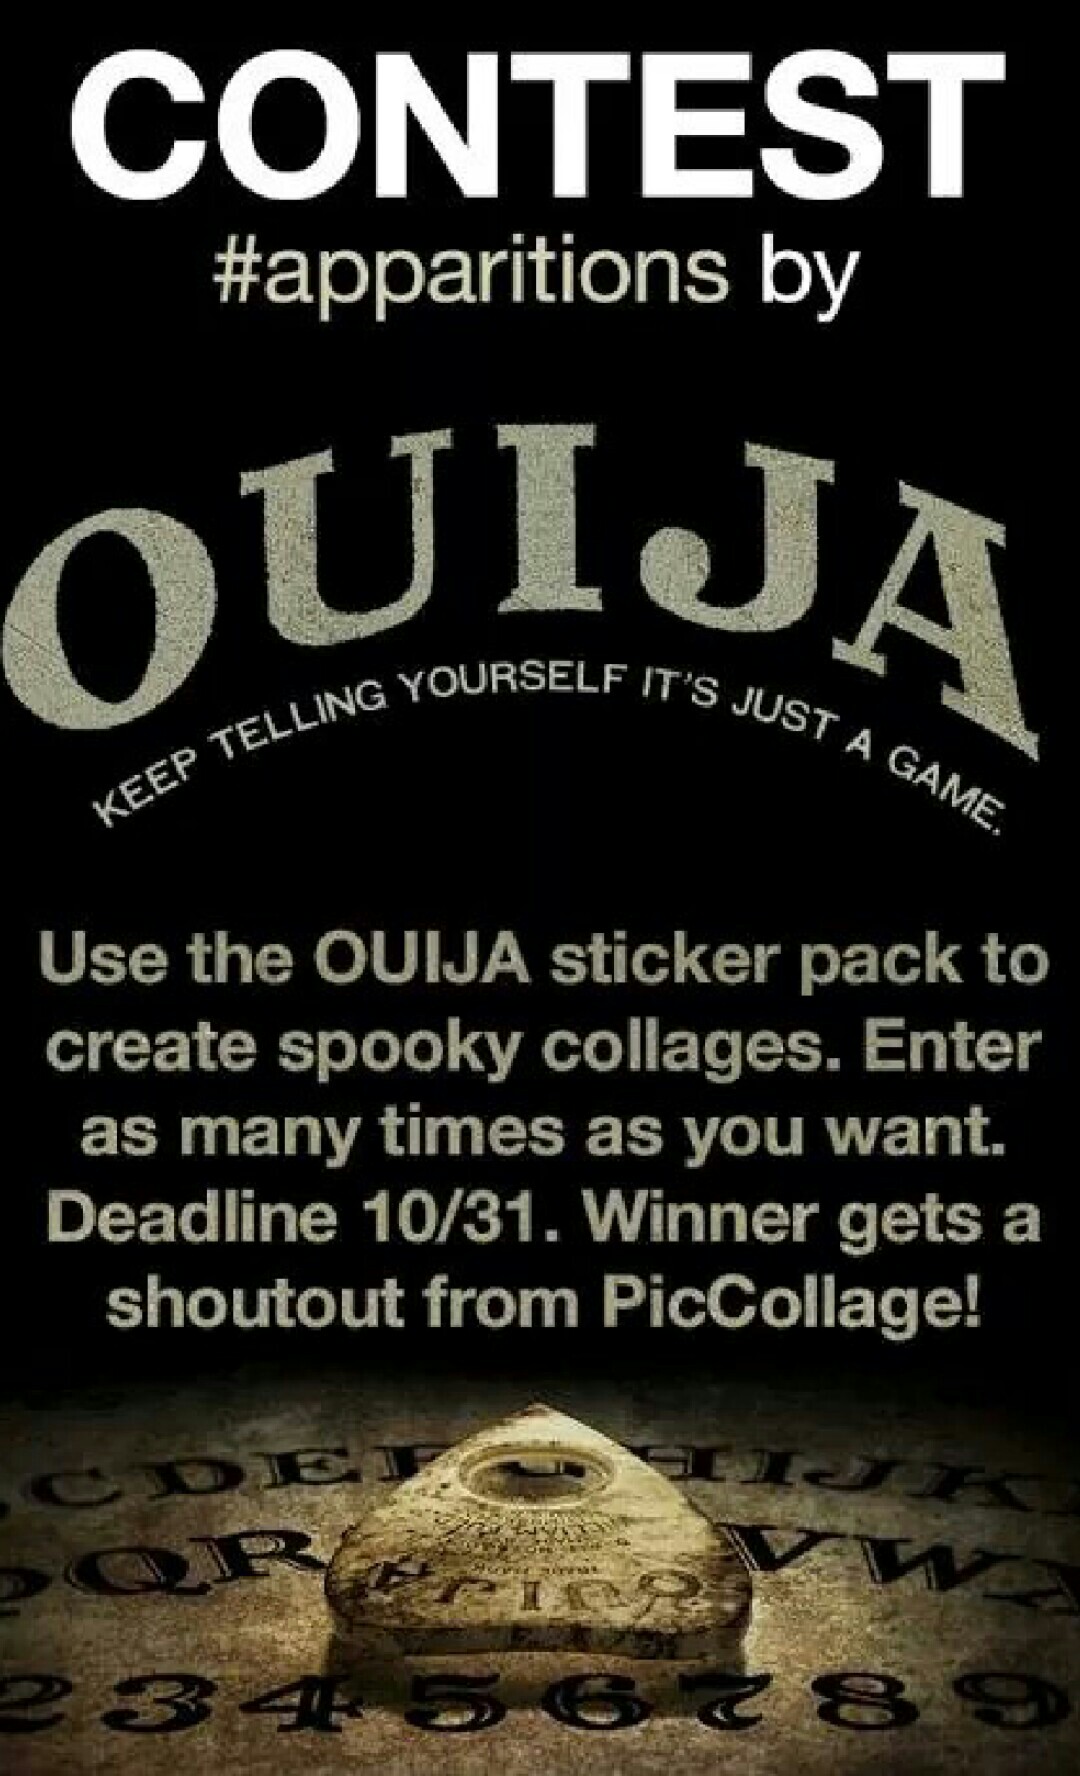 Use the OUIJA stickers to get a shoutout from PicCollage! 